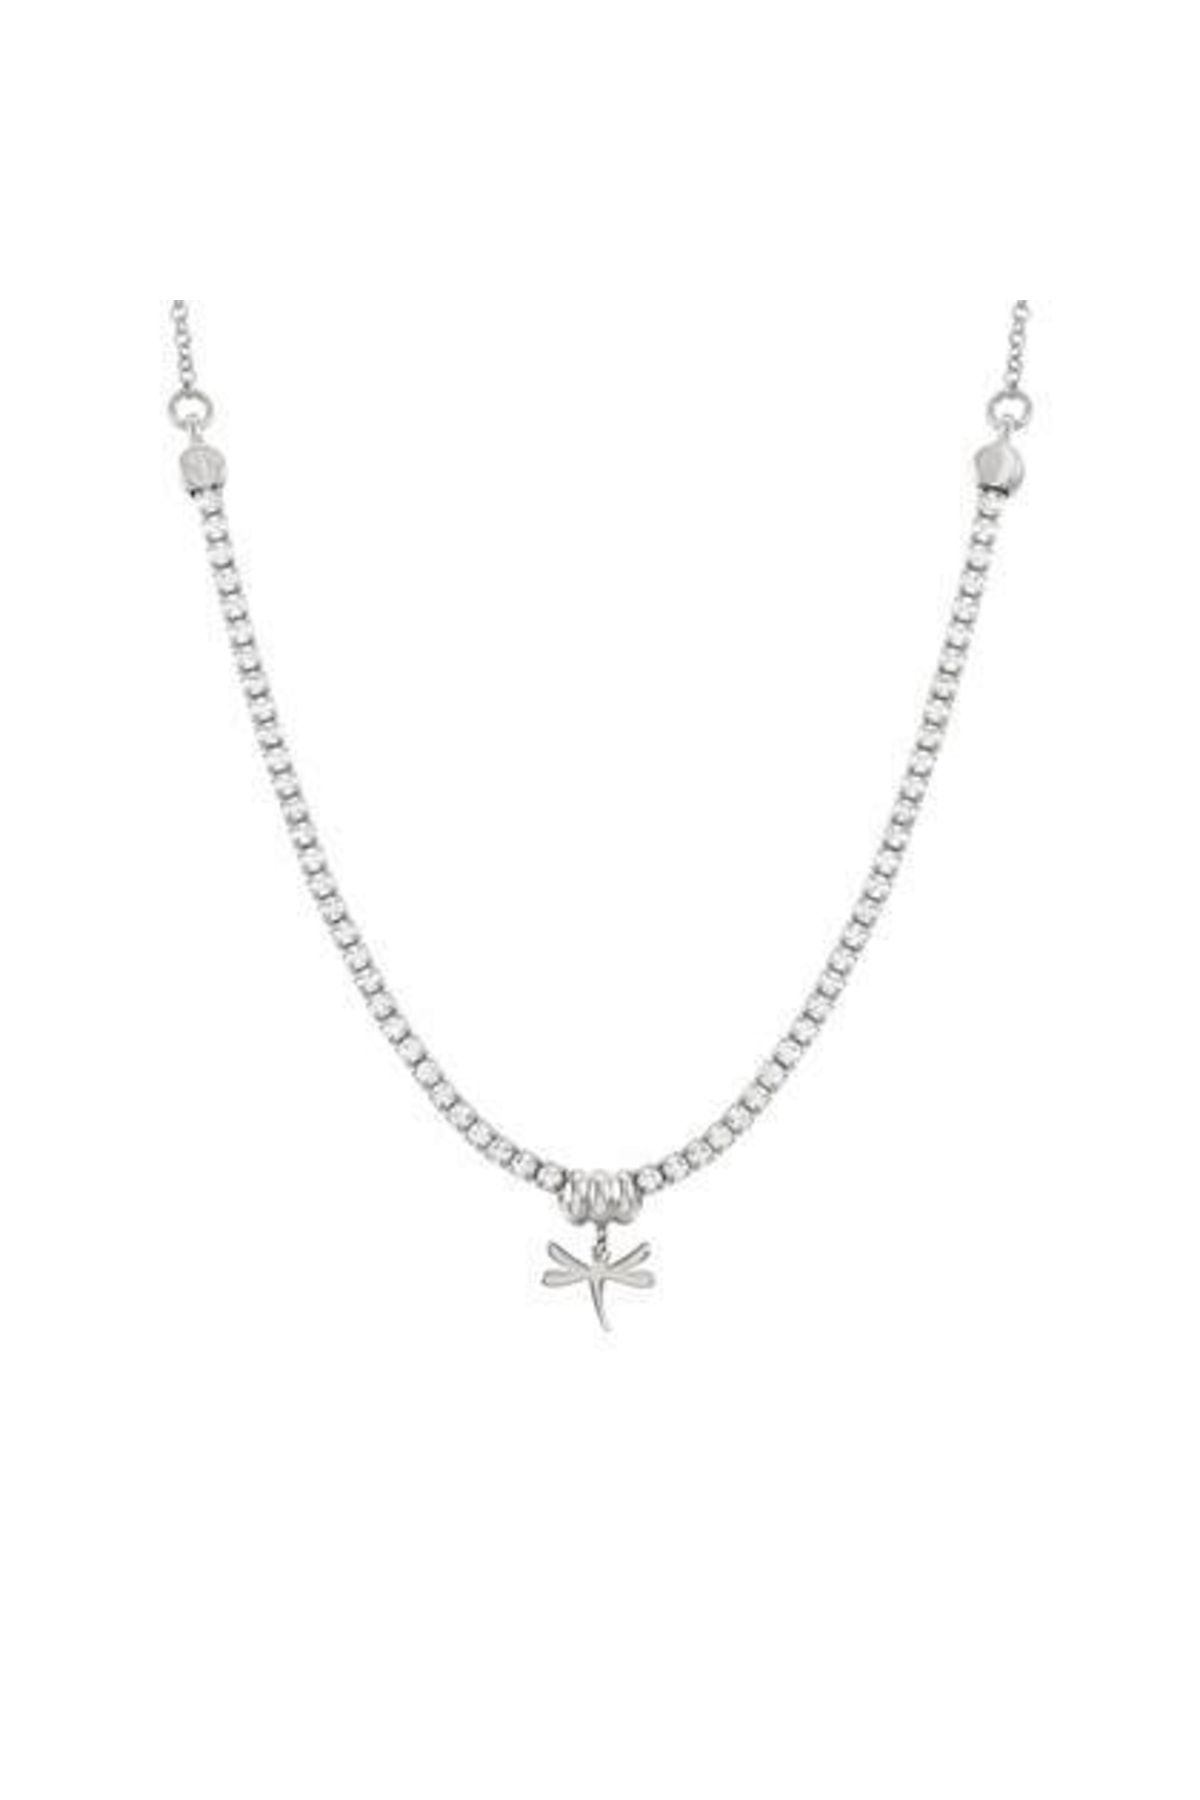 NOMİNATİON Chıc&charm Necklace In 925 Silver And Cubic Zirconia (046_silver Dragonfly)